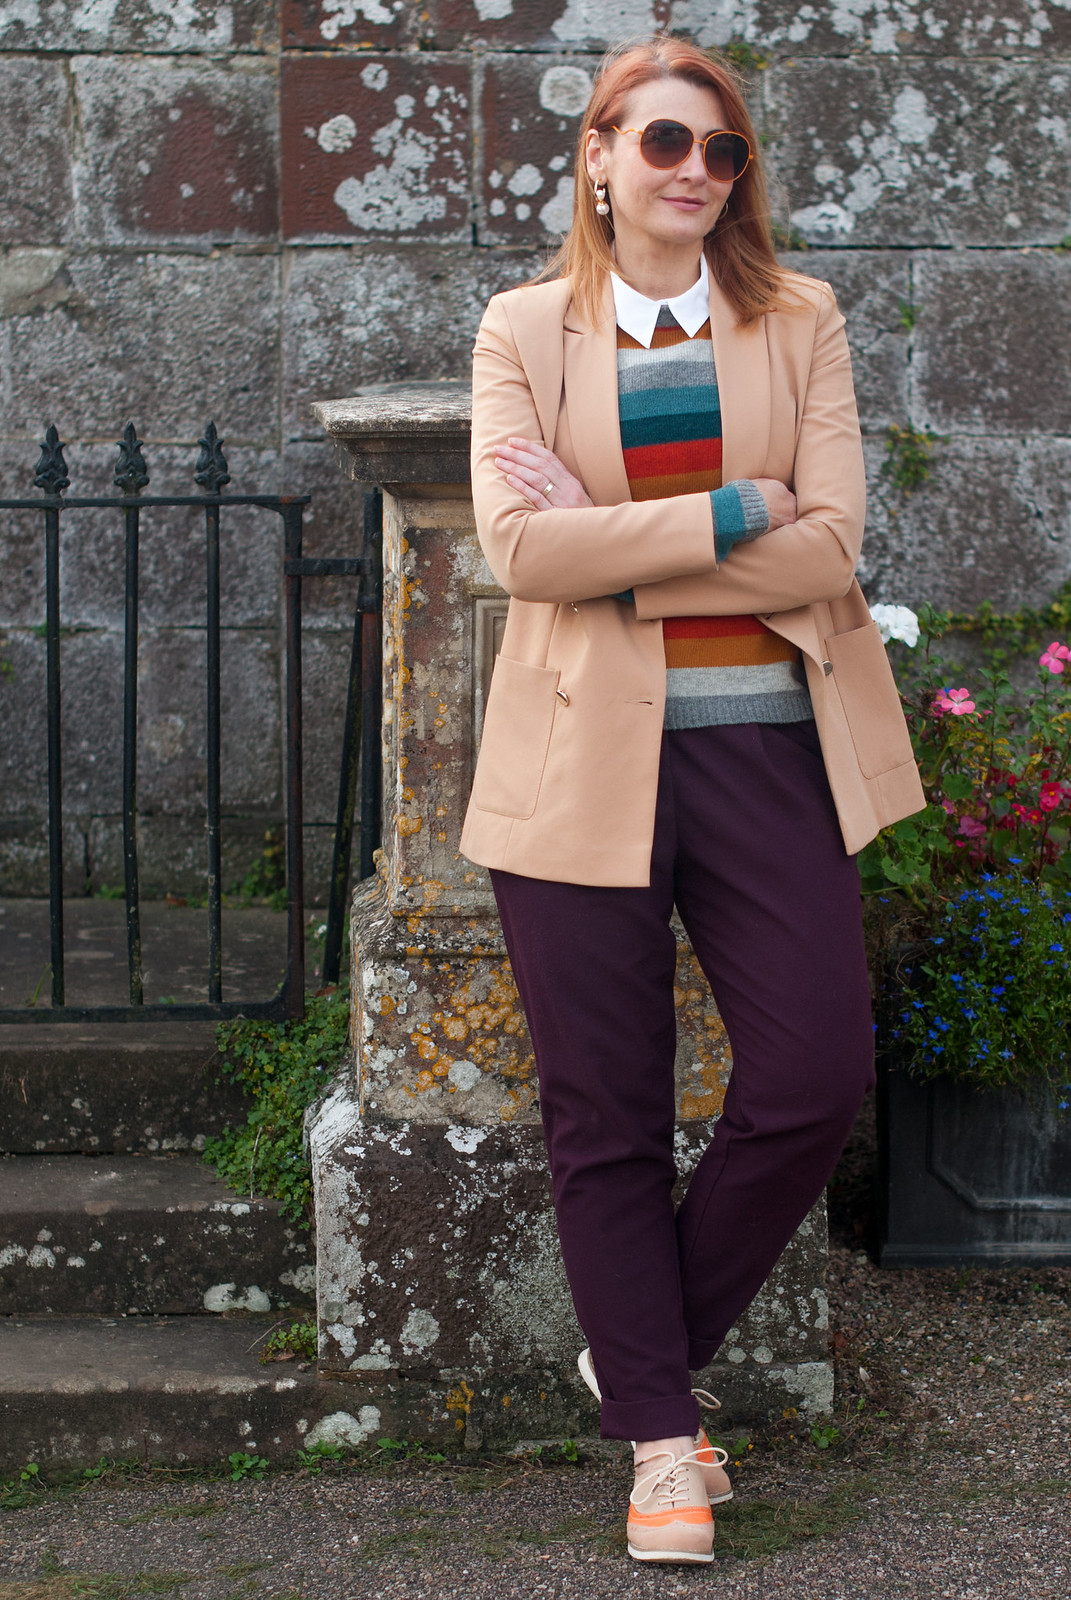 Preppy Style in the Autumn: Double breasted camel blazer \ striped Seasalt sweater \ white button down shirt \ aubergine peg trousers pants \ two tone brogues \ orange vintage sunglasses | Not Dressed As Lamb, Over 40 Style